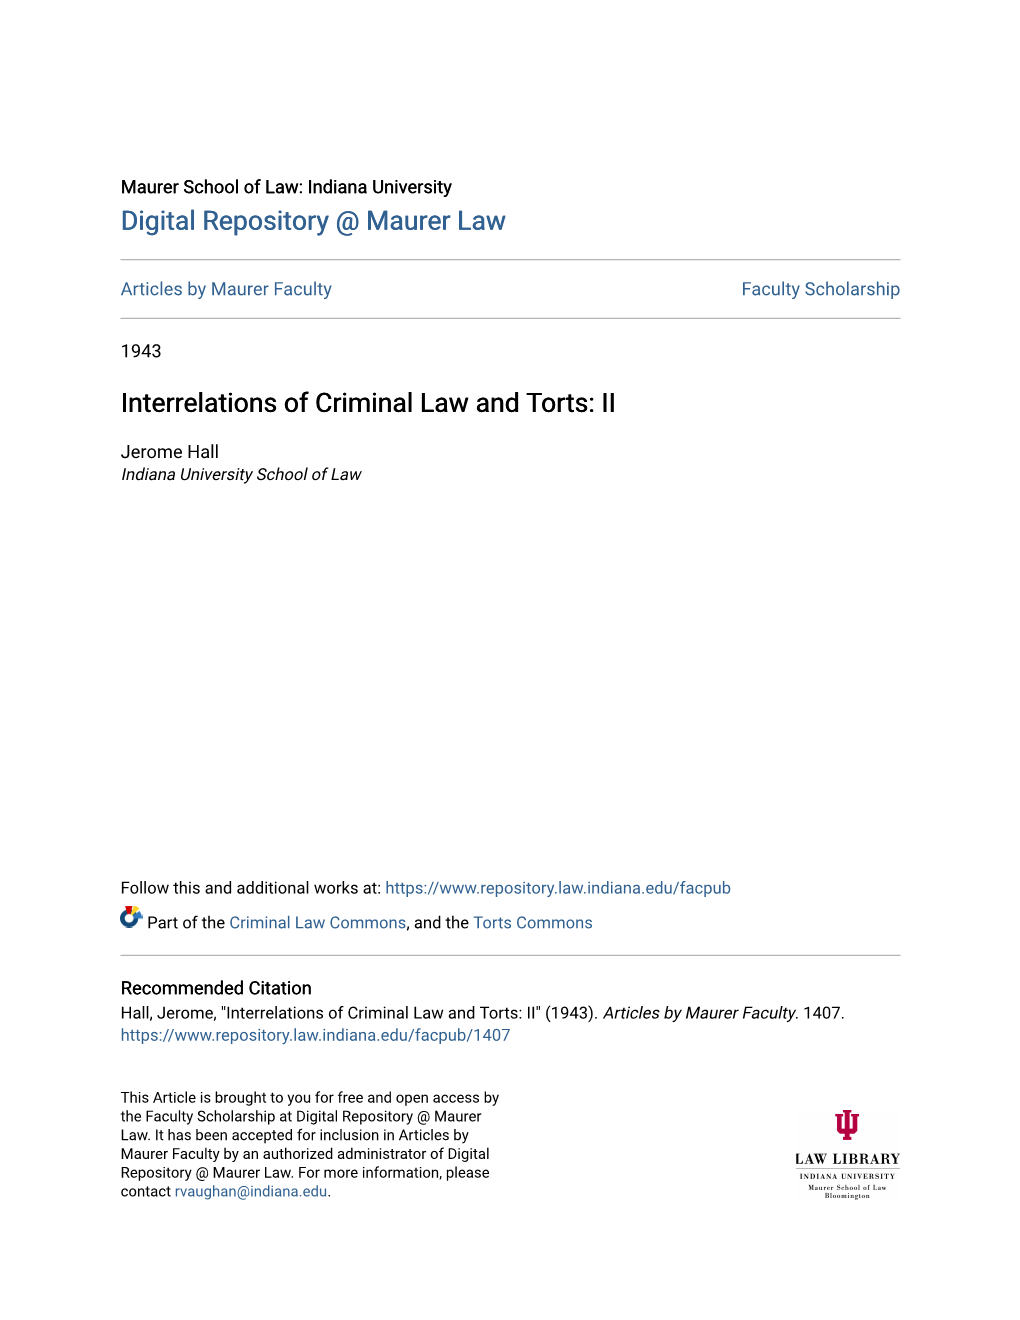 Interrelations of Criminal Law and Torts: II